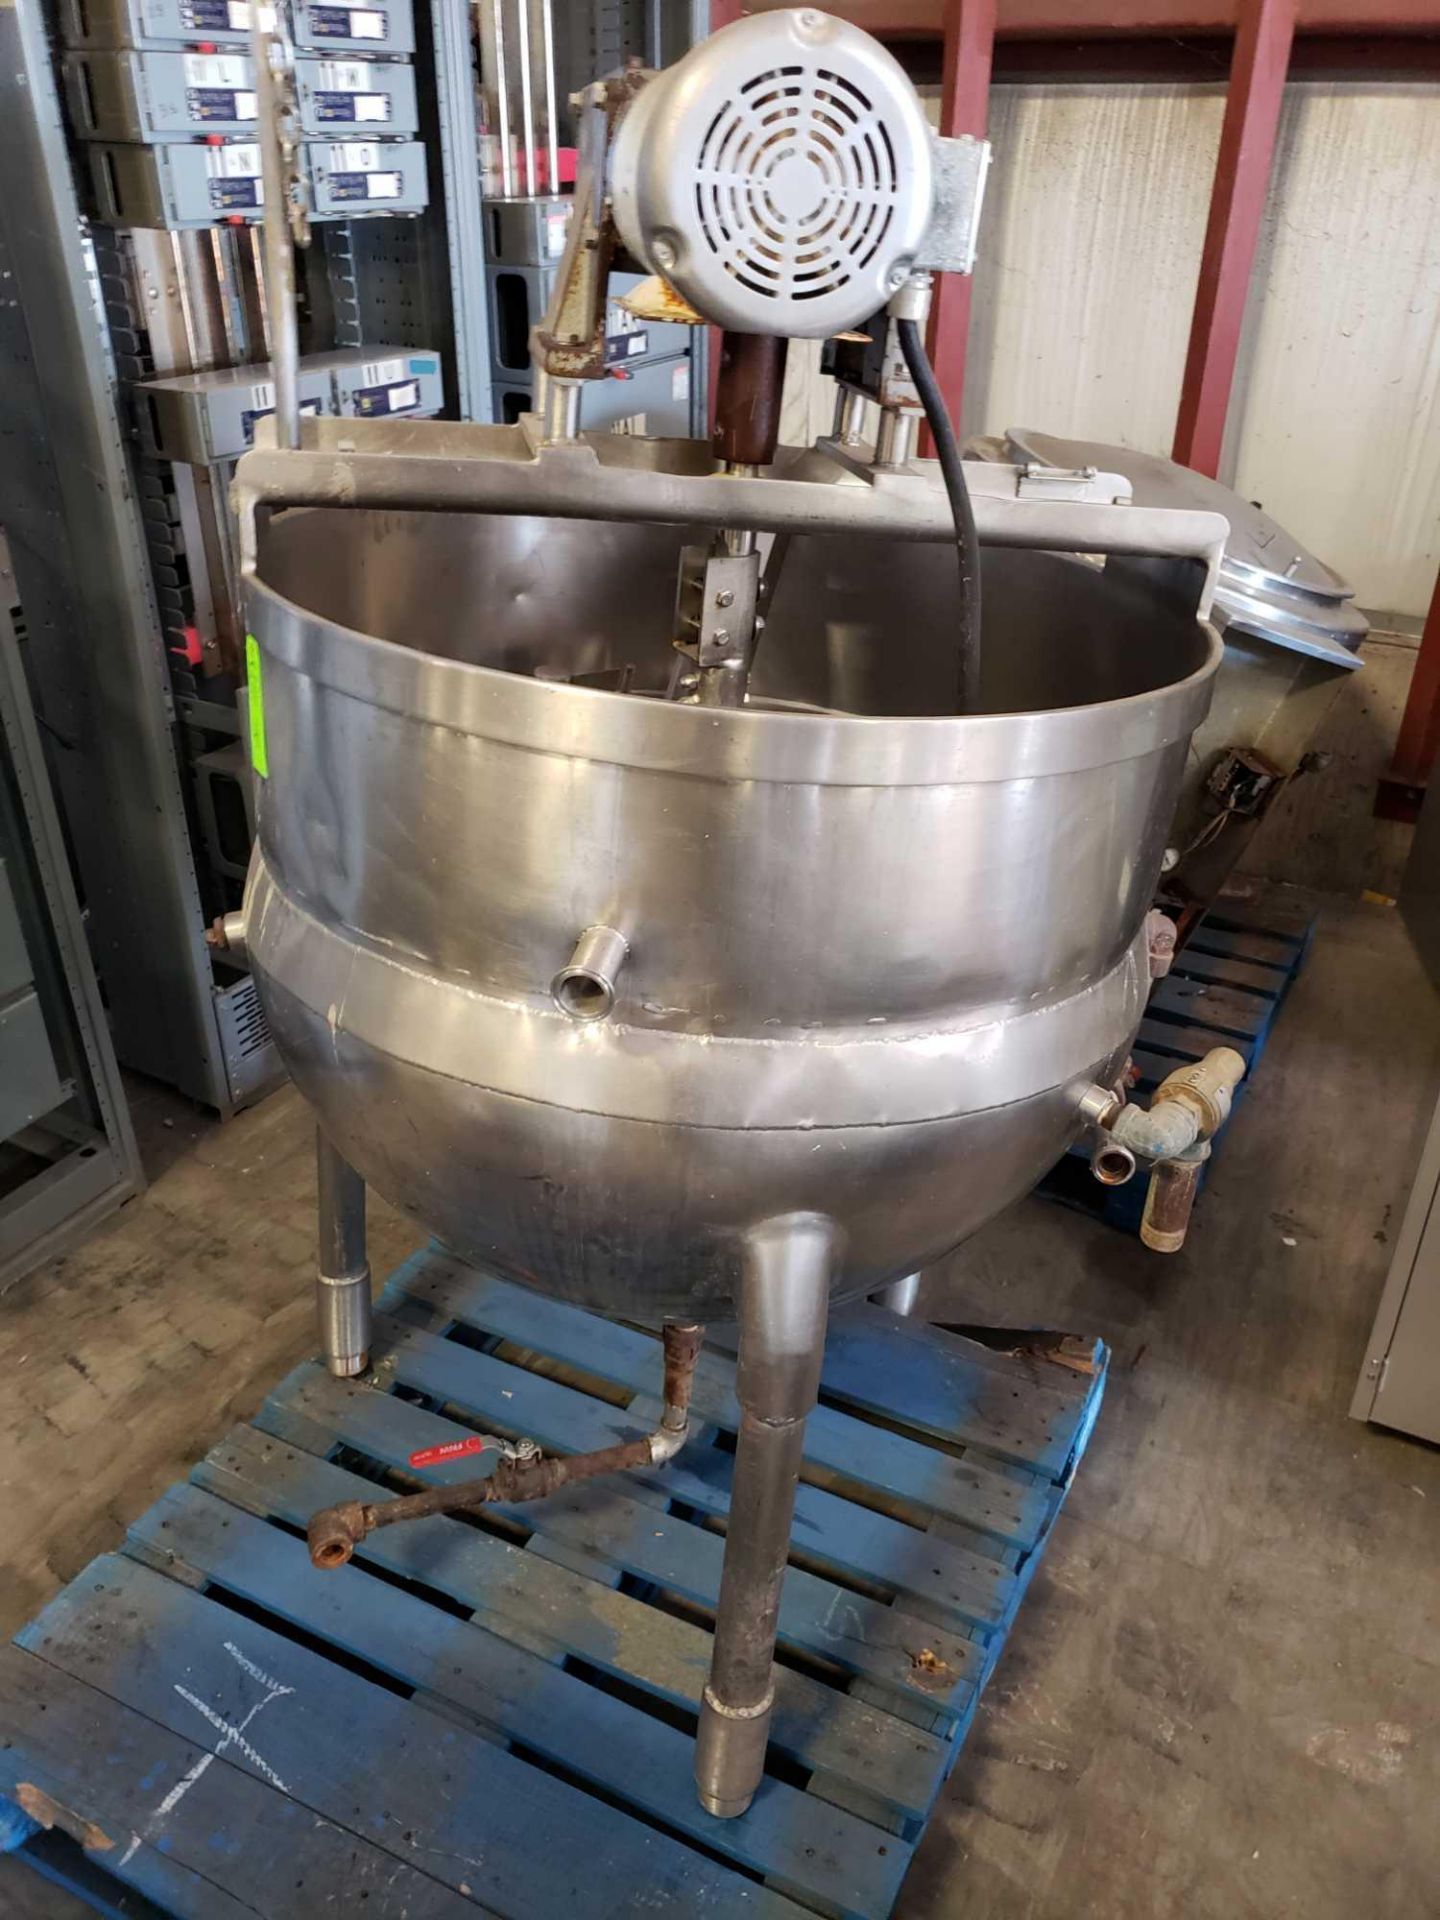 Groen 1X stainless steel mixing kettle. Dimensions of kettle 40" diameter x 30" deep interior. - Image 3 of 11